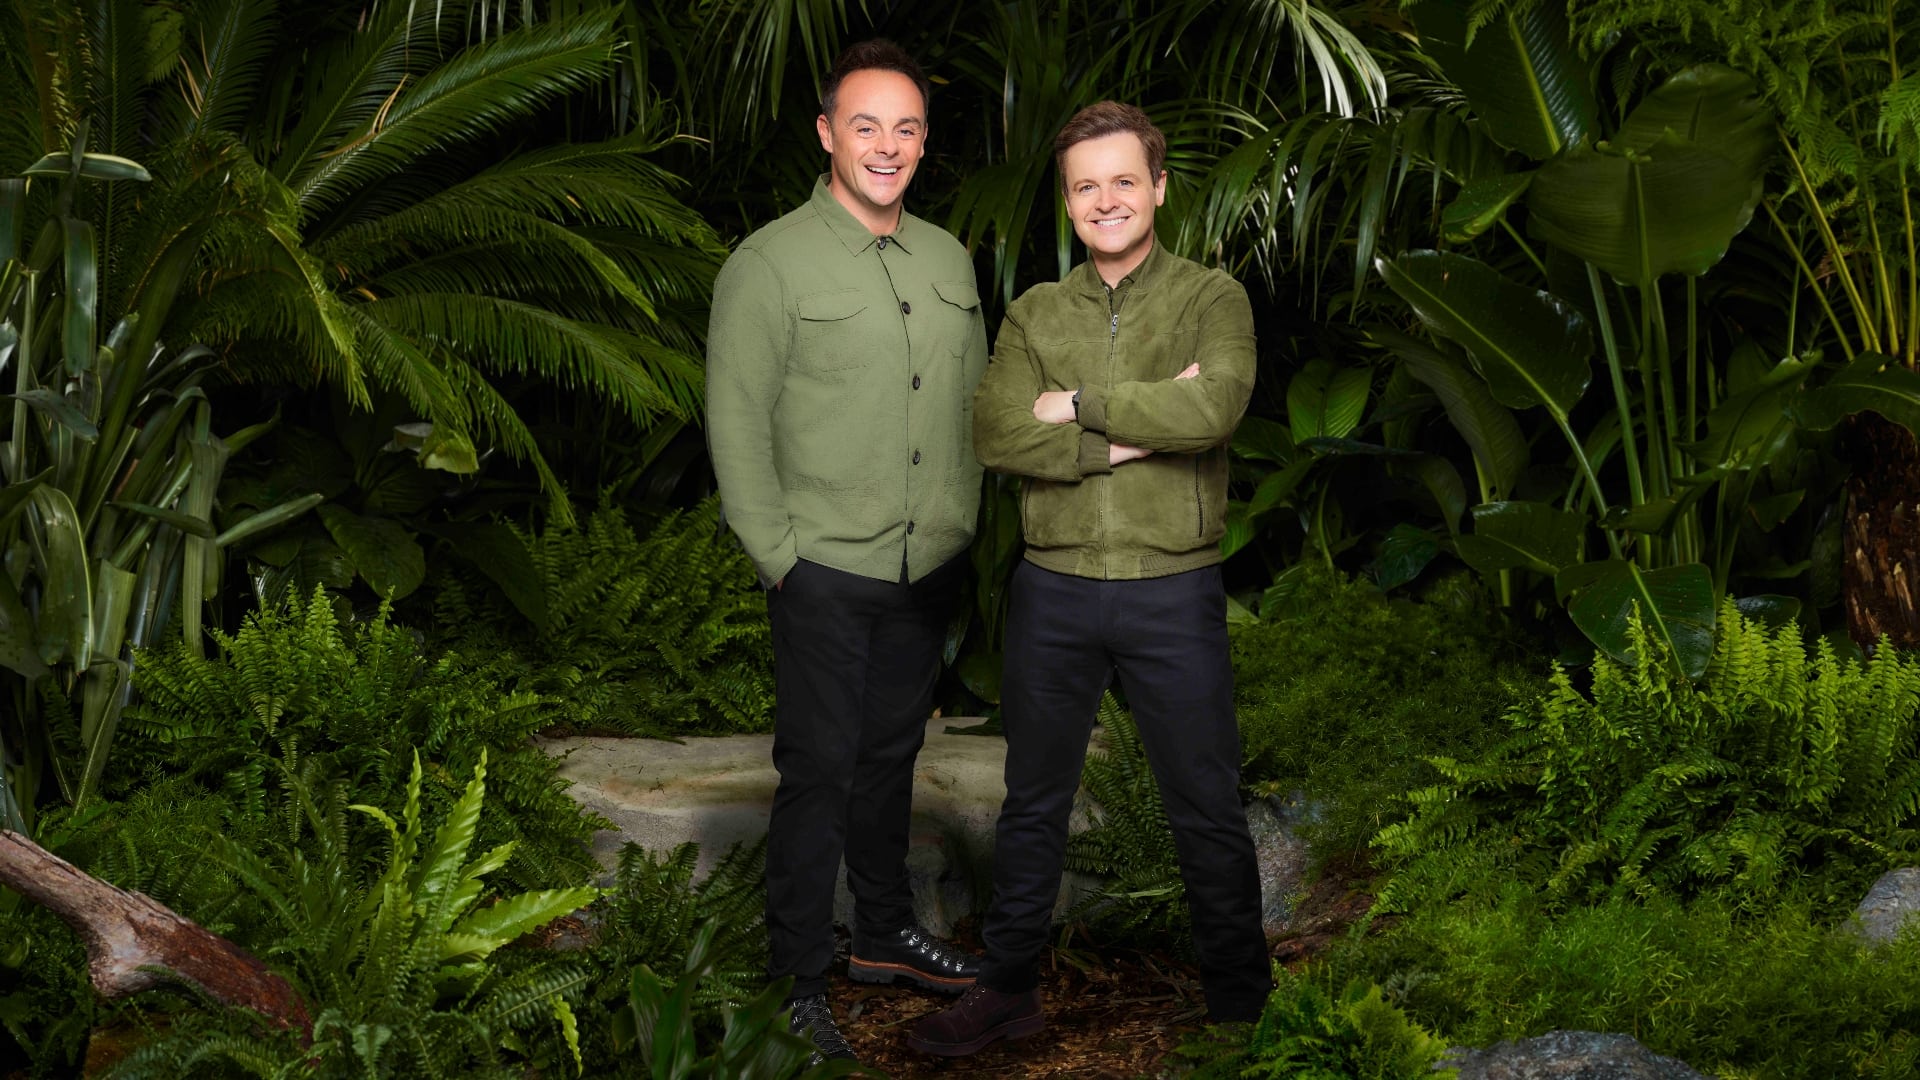 I'm a Celebrity, Get Me Out of Here! season 23